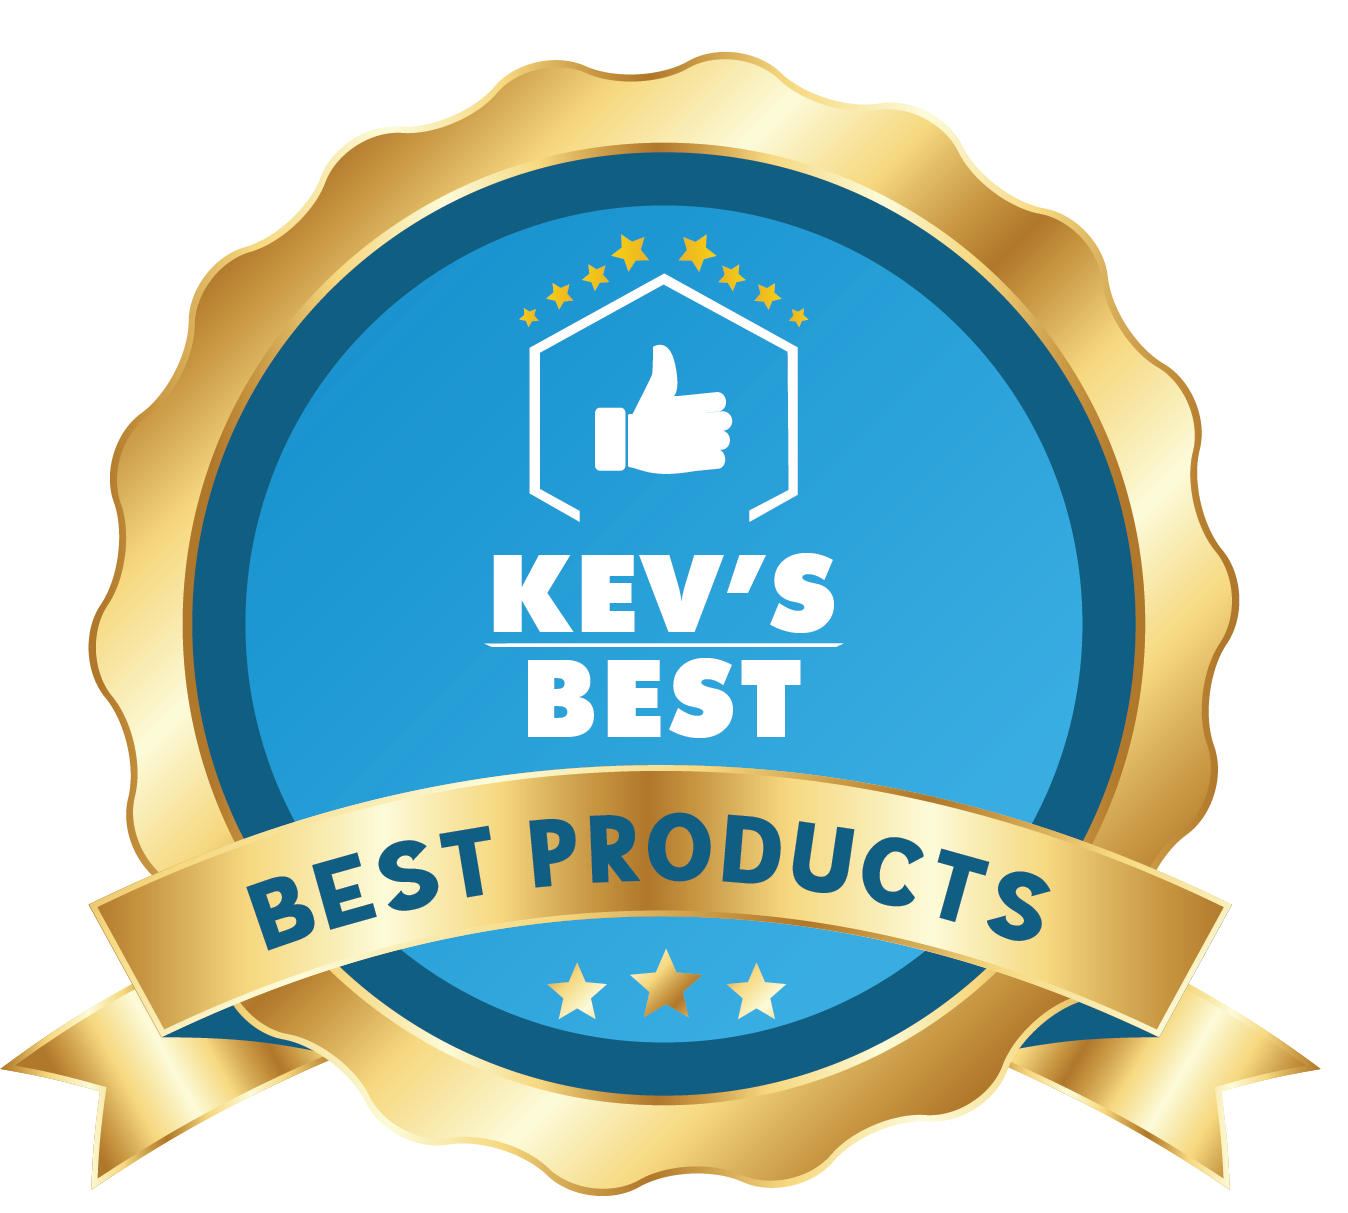 Kev's Best Best Products seal with a thumbs-up icon toward the top above the text.